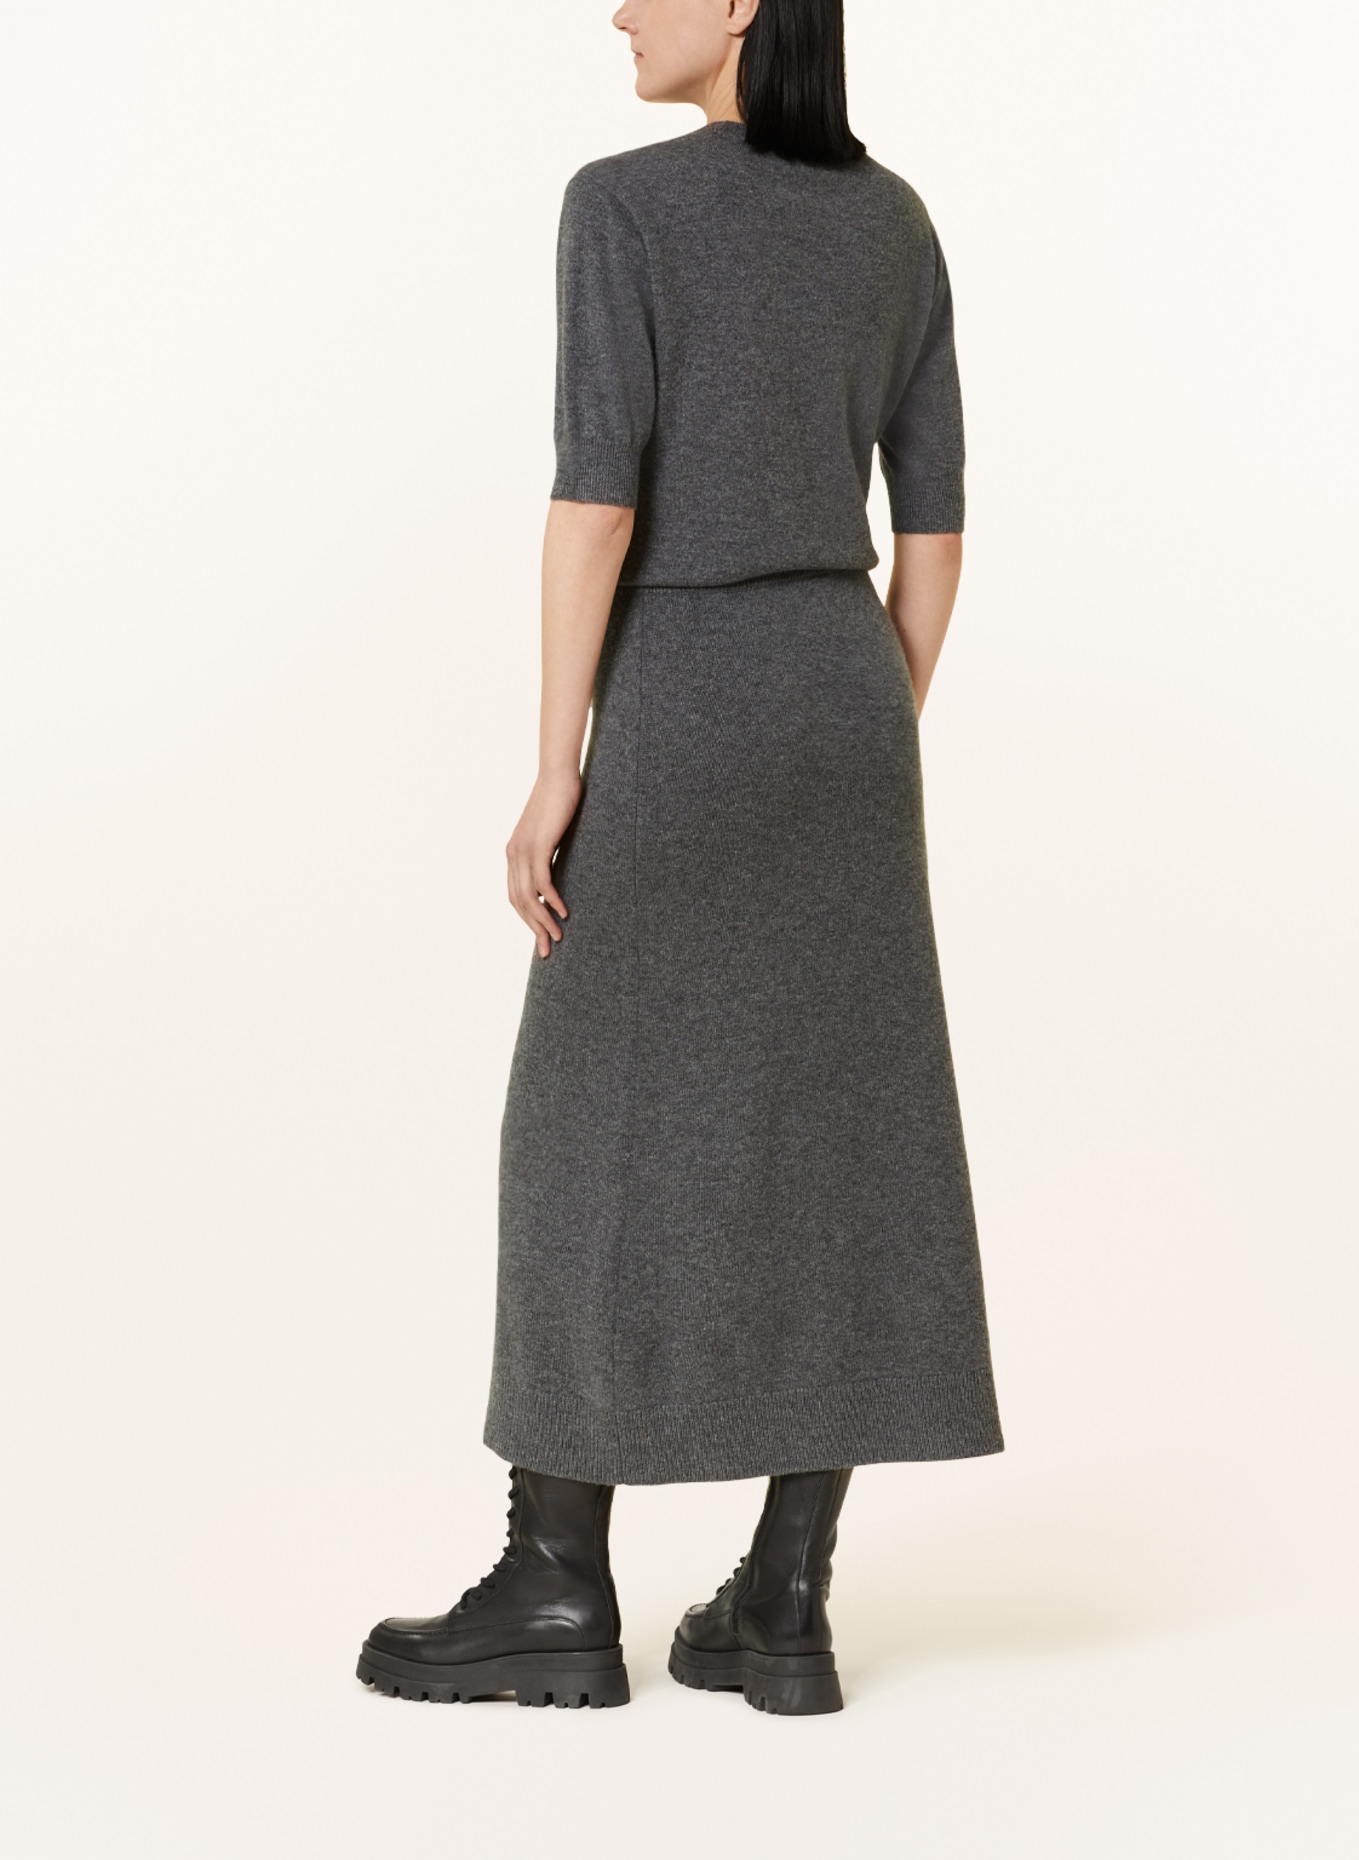 SMINFINITY Knit skirt in cashmere, Color: DARK GRAY (Image 3)